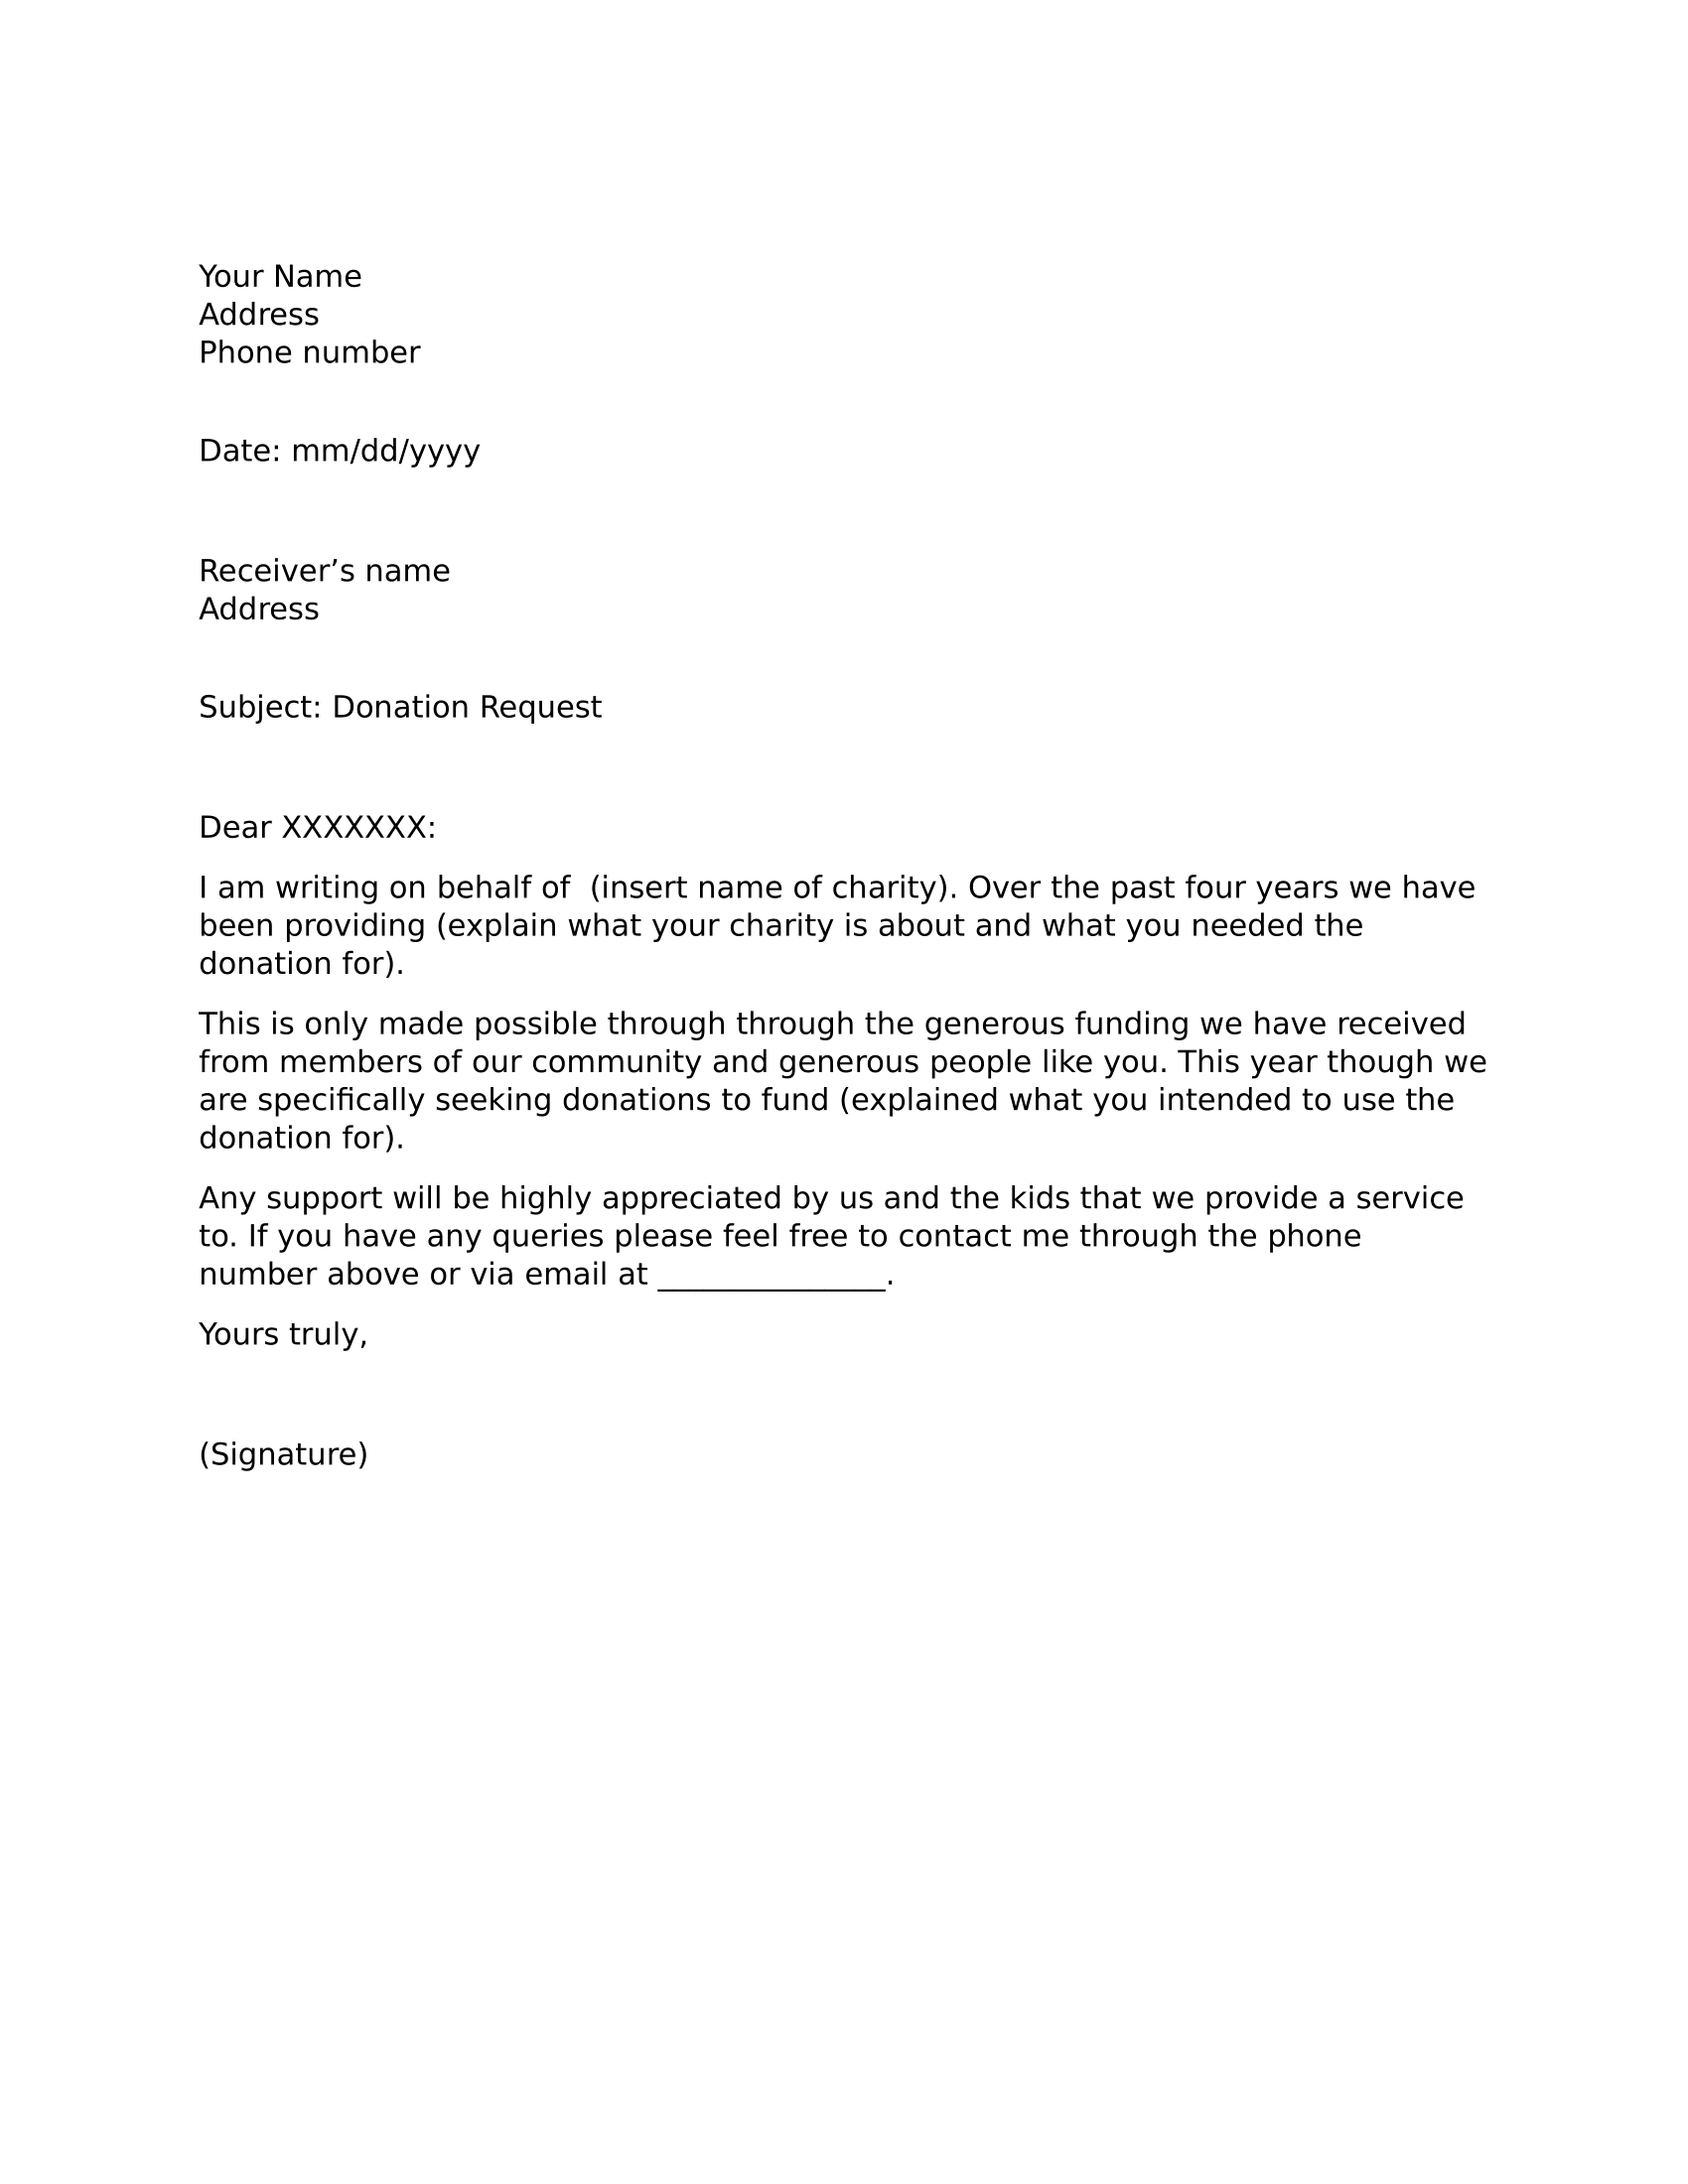 How to write an application letter to get a job